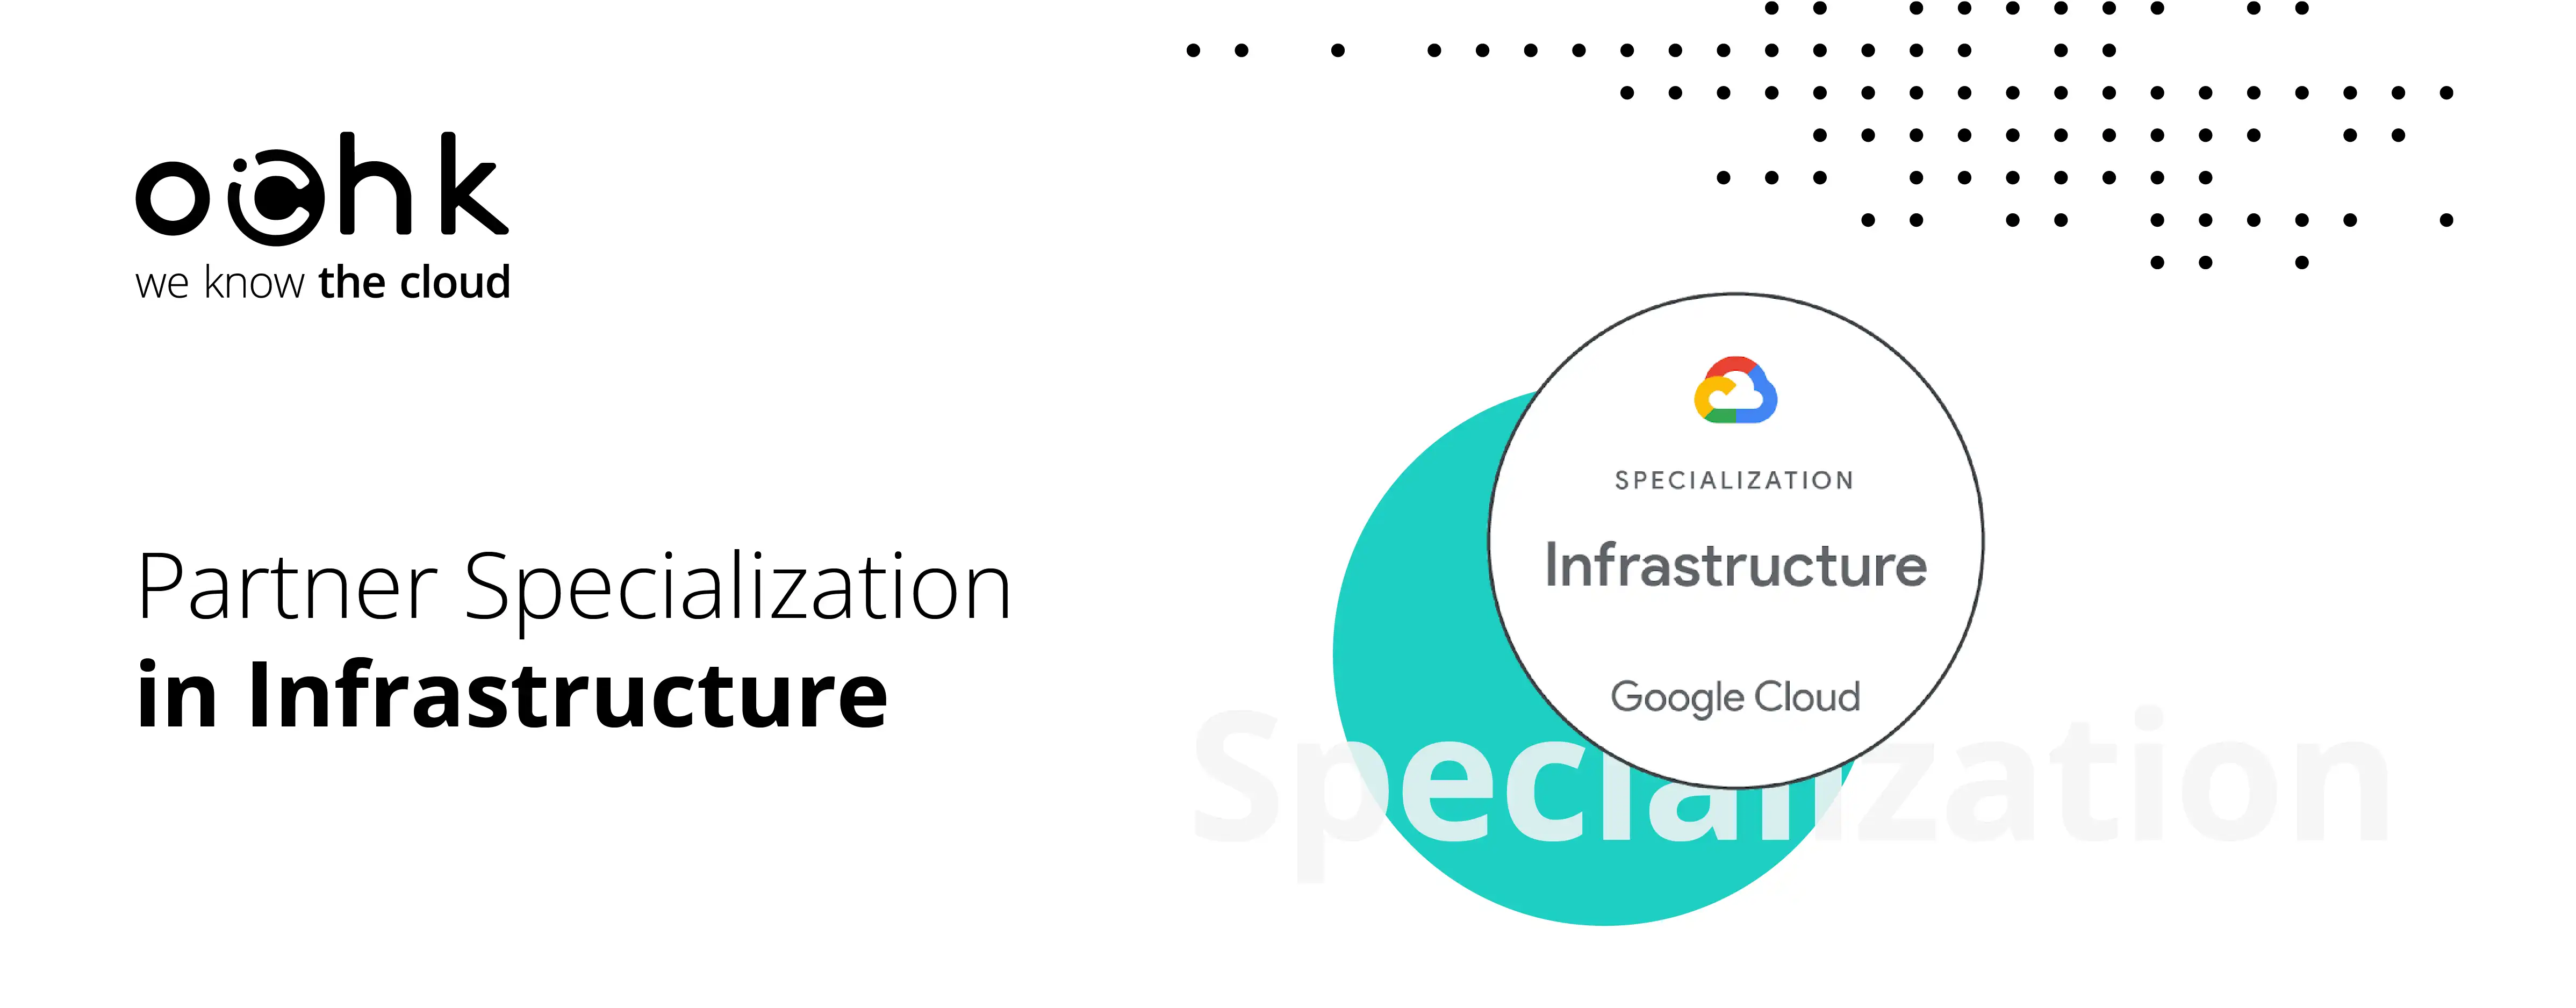 OChK with Google Cloud specialization: Infrastructure – Services